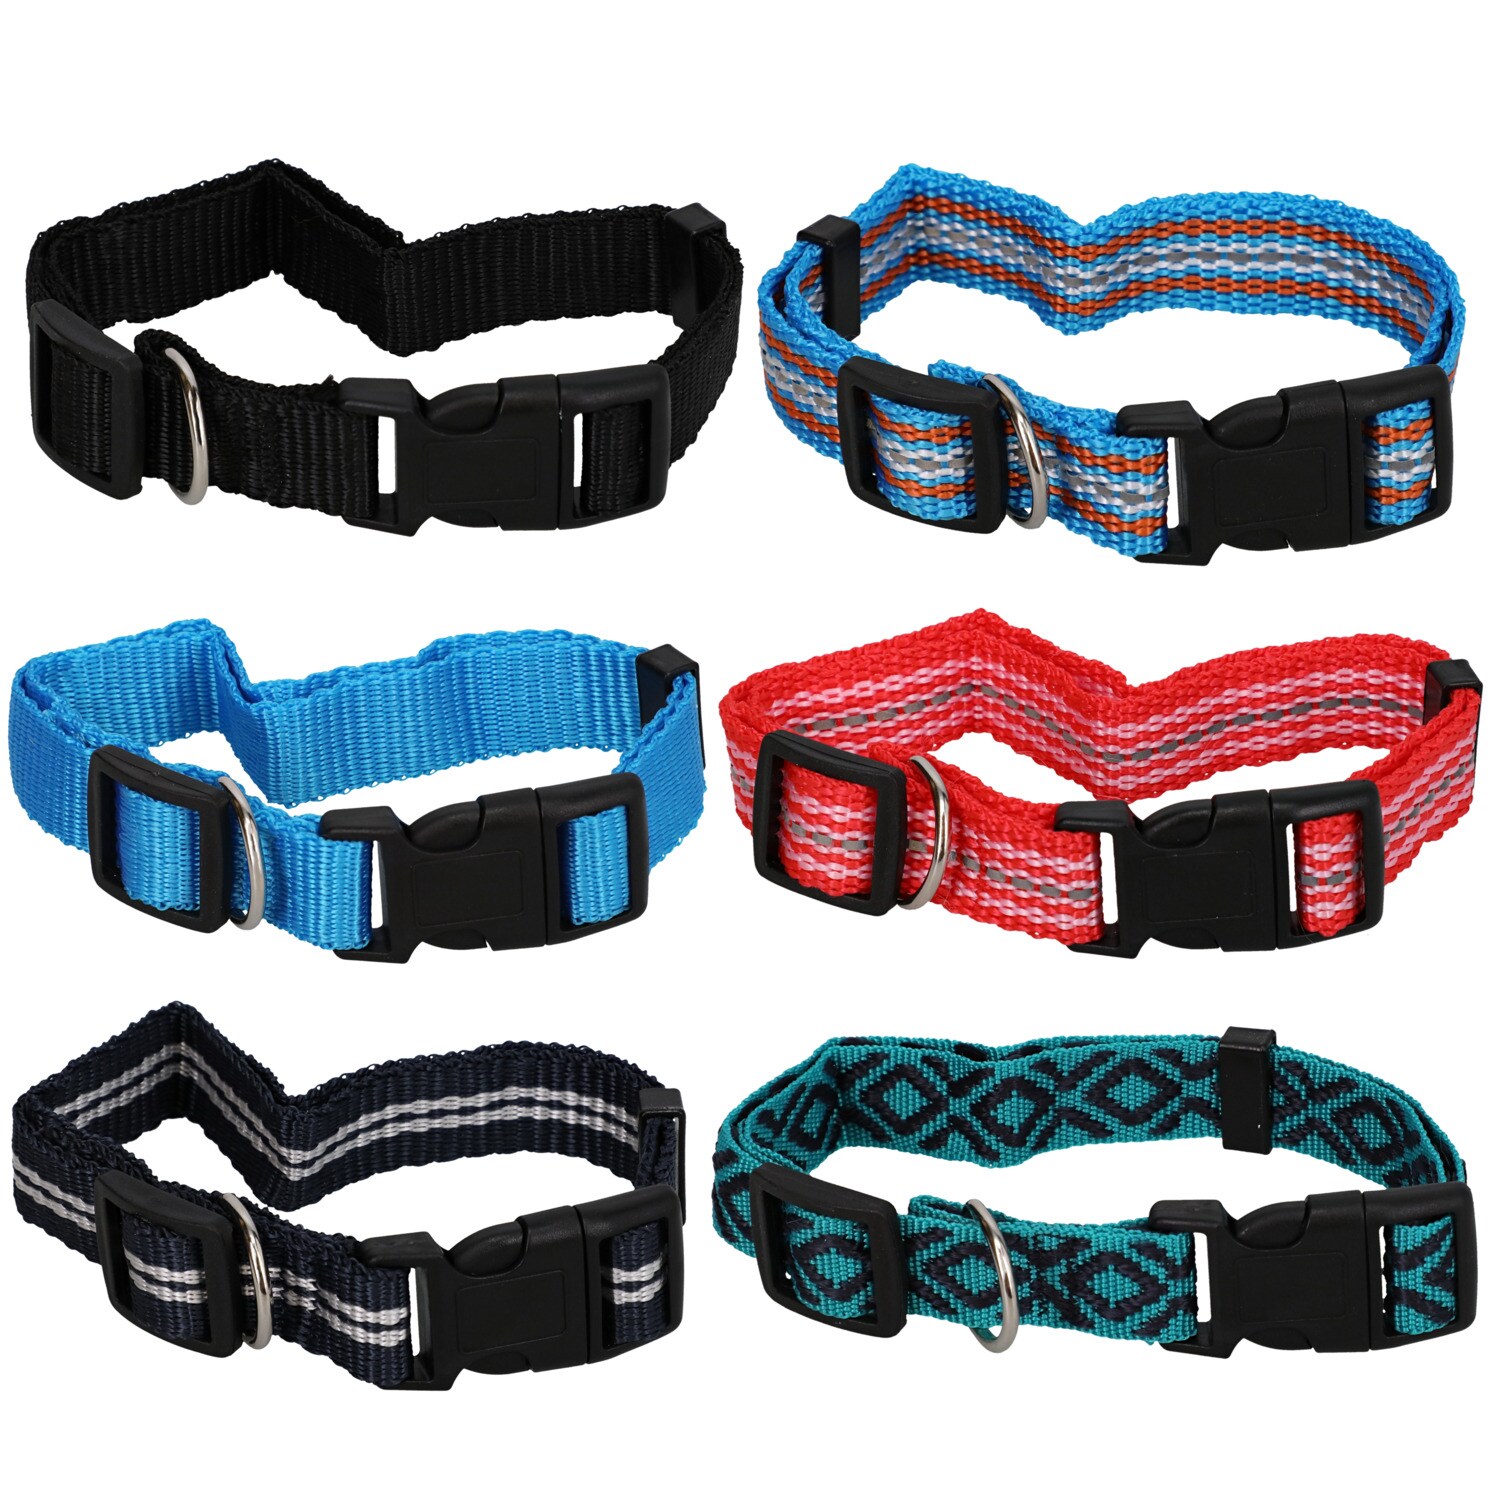 Greenbrier Kennel Club Small Adjustable Dog Harnesses 